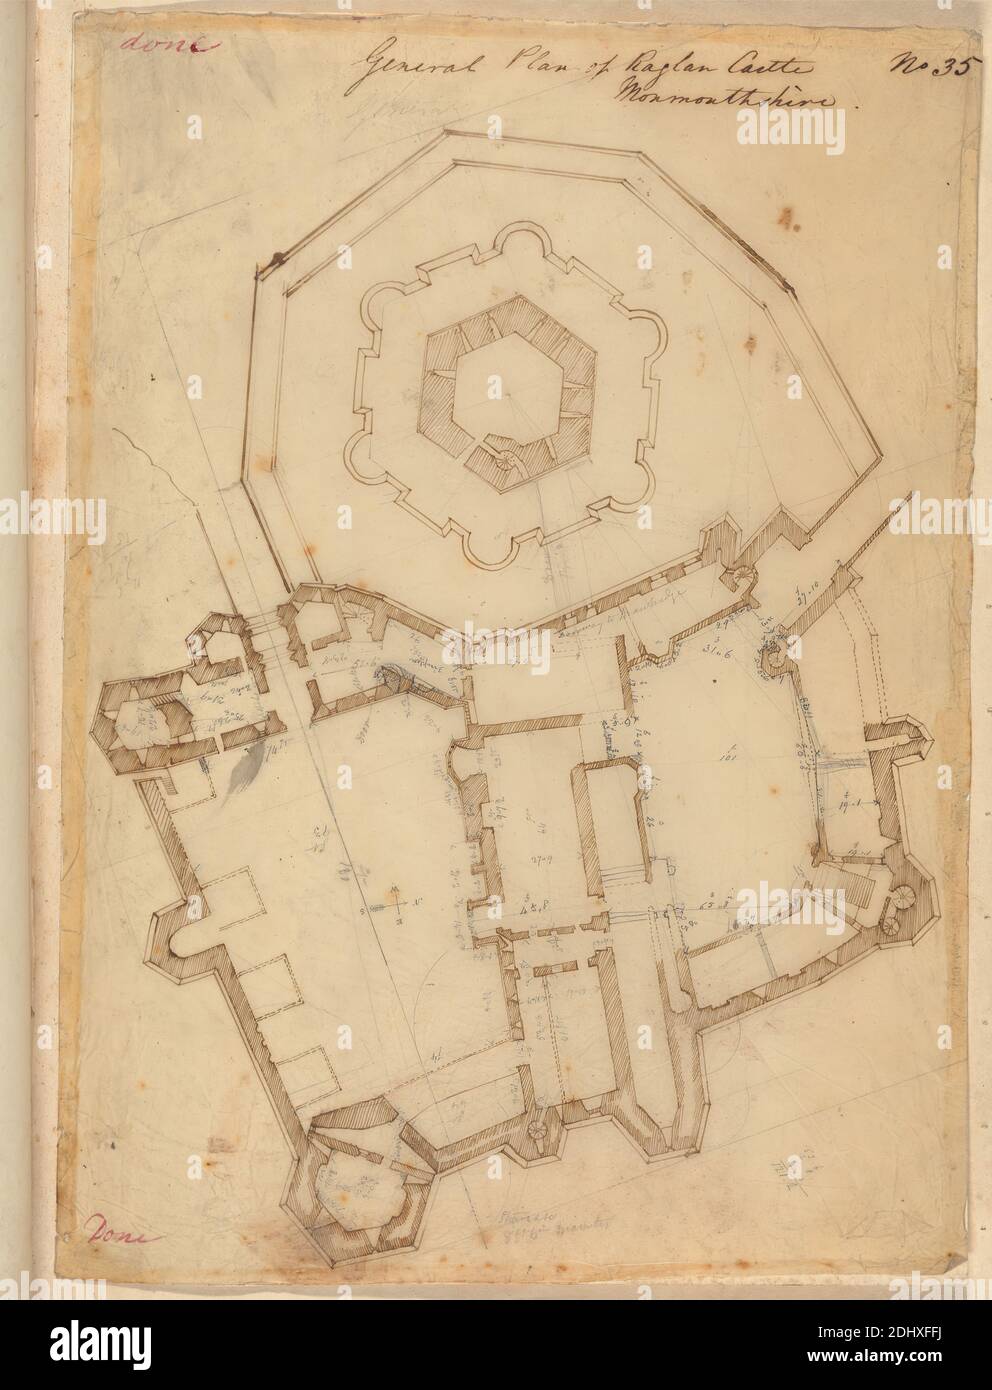 Raglan Castle, Monmouthshire, Wales: Ground Plan, Augustus Welby Northmore Pugin, 1812–1852, British, Studio of Augustus Charles Pugin, 1762–1832, French, undated, Graphite and pen and brown ink on thin, smooth, cream tracing paper, Sheet: 13 1/4 x 9 3/4 inches (33.7 x 24.8 cm), architectural subject, castle, fort, Gothic (Medieval), plans (drawings), turrets (towers), walls, Monmouthshire, Raglan Castle Stock Photo